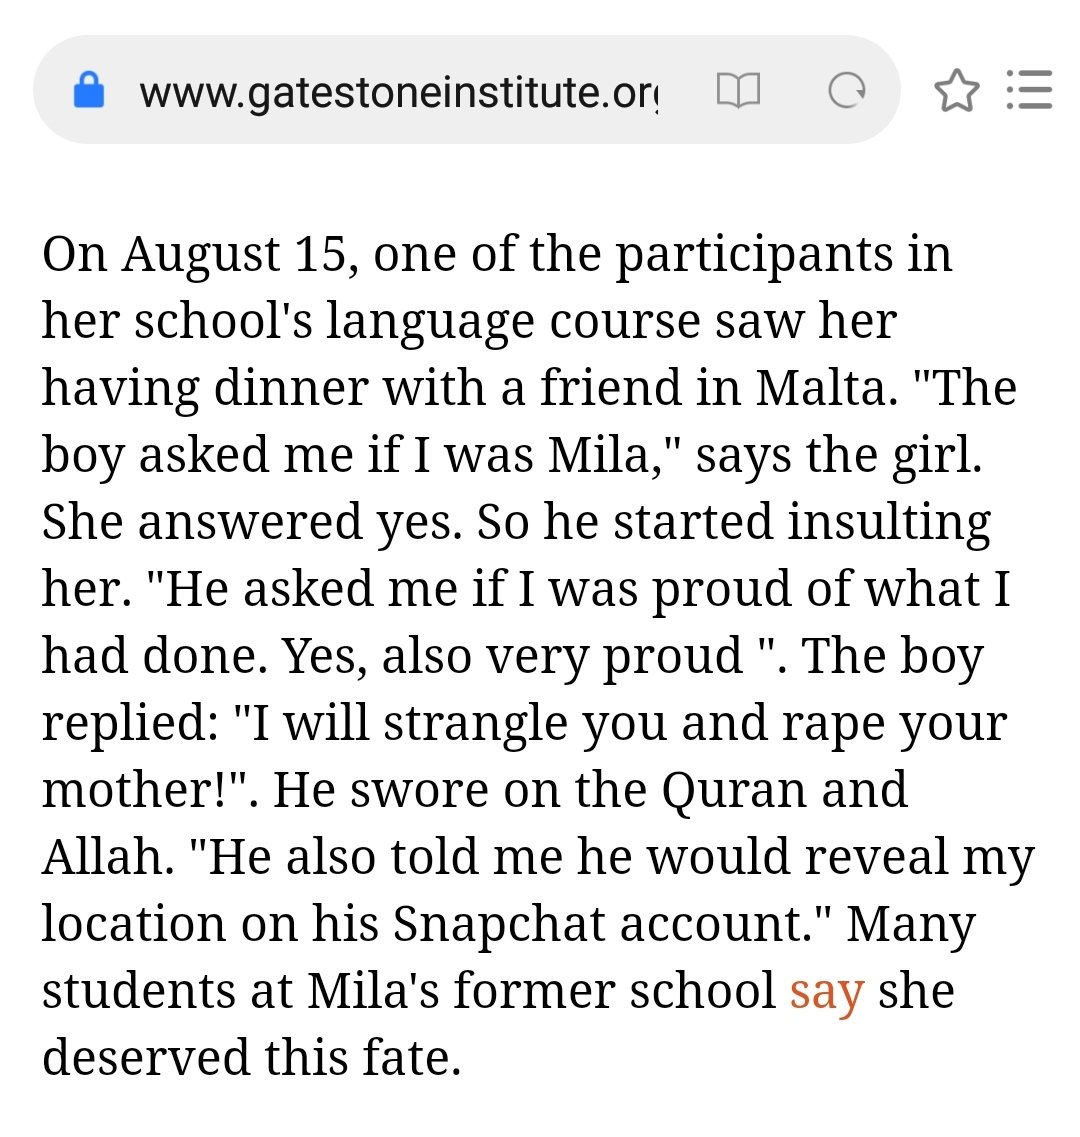 The boy replied:"I will strangle you and rape your mother!".He swore on the Quran and Allah."He also told me he would reveal my location on his Snapchat account."Many students at Mila's former school say she deserved this fate. https://www.lepoint.fr/societe/mila-elle-a-eu-ce-qu-elle-meritait-16-10-2020-2396734_23.php.